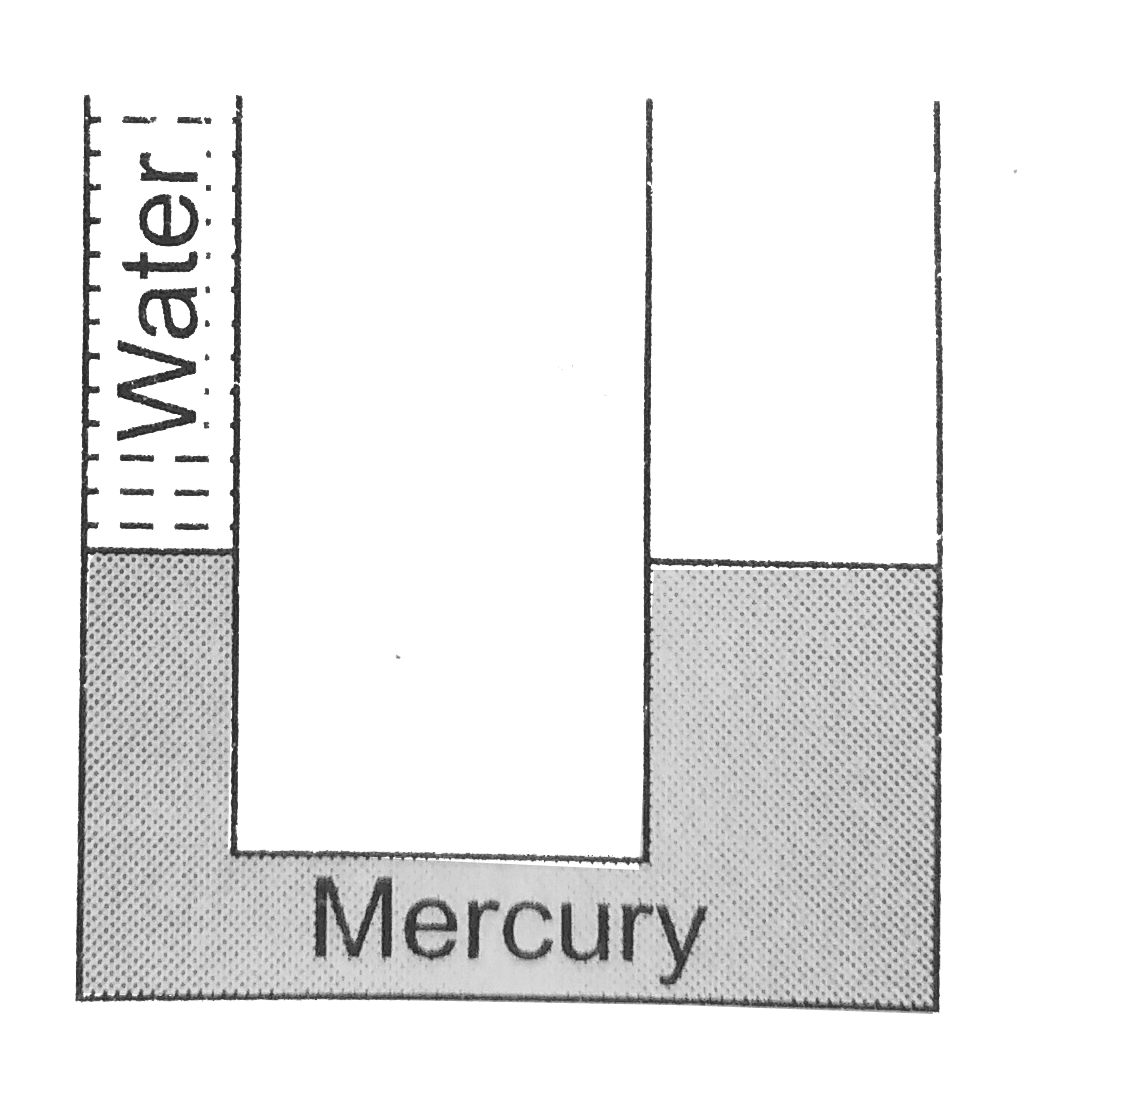 A U -tube in which the cross - sectional area of the limb on the left is one quarter, the limb on the right contains mercury (density =13.6 g//cm^3). The level of mercury  in the narrow limb is at a distance of 36 cm from  the upper end of the tube. What will be the rise in the level of mercury in the right limb if the left limb is filled to the top with water ?